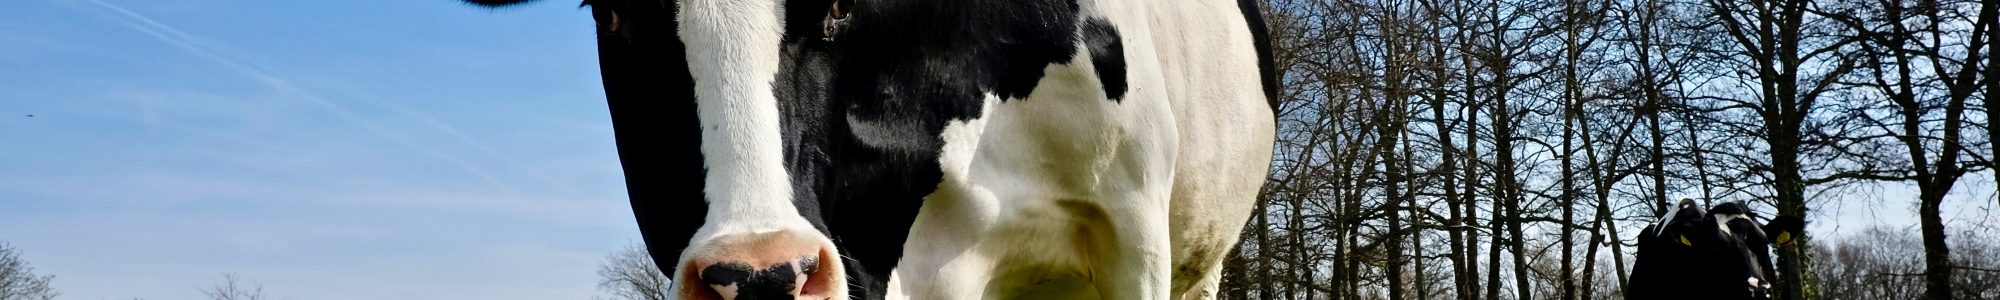 Two black and white cows in a field with one of them looking directly into the camera.